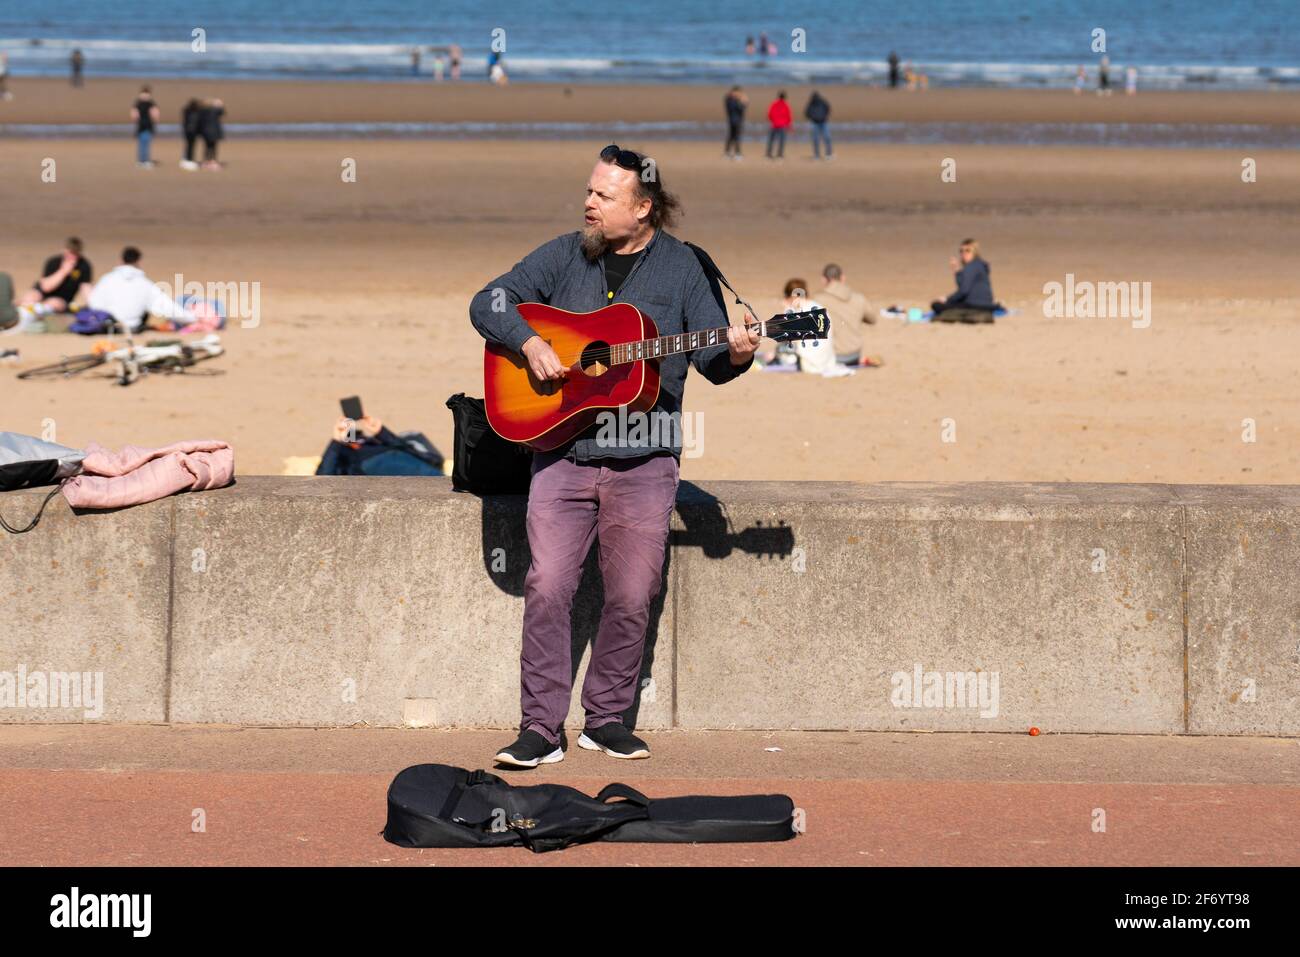 Portobello, Scotland, UK. 3 April 2021. Easter weekend crowds descend on Portobello beach and promenade to make the most of newly relaxed  Covid-19 lockdown travel restrictions and warm sunshine with uninterrupted blue skies. Pic;  Buskers have returned. Iain Masterton/Alamy Live News Stock Photo